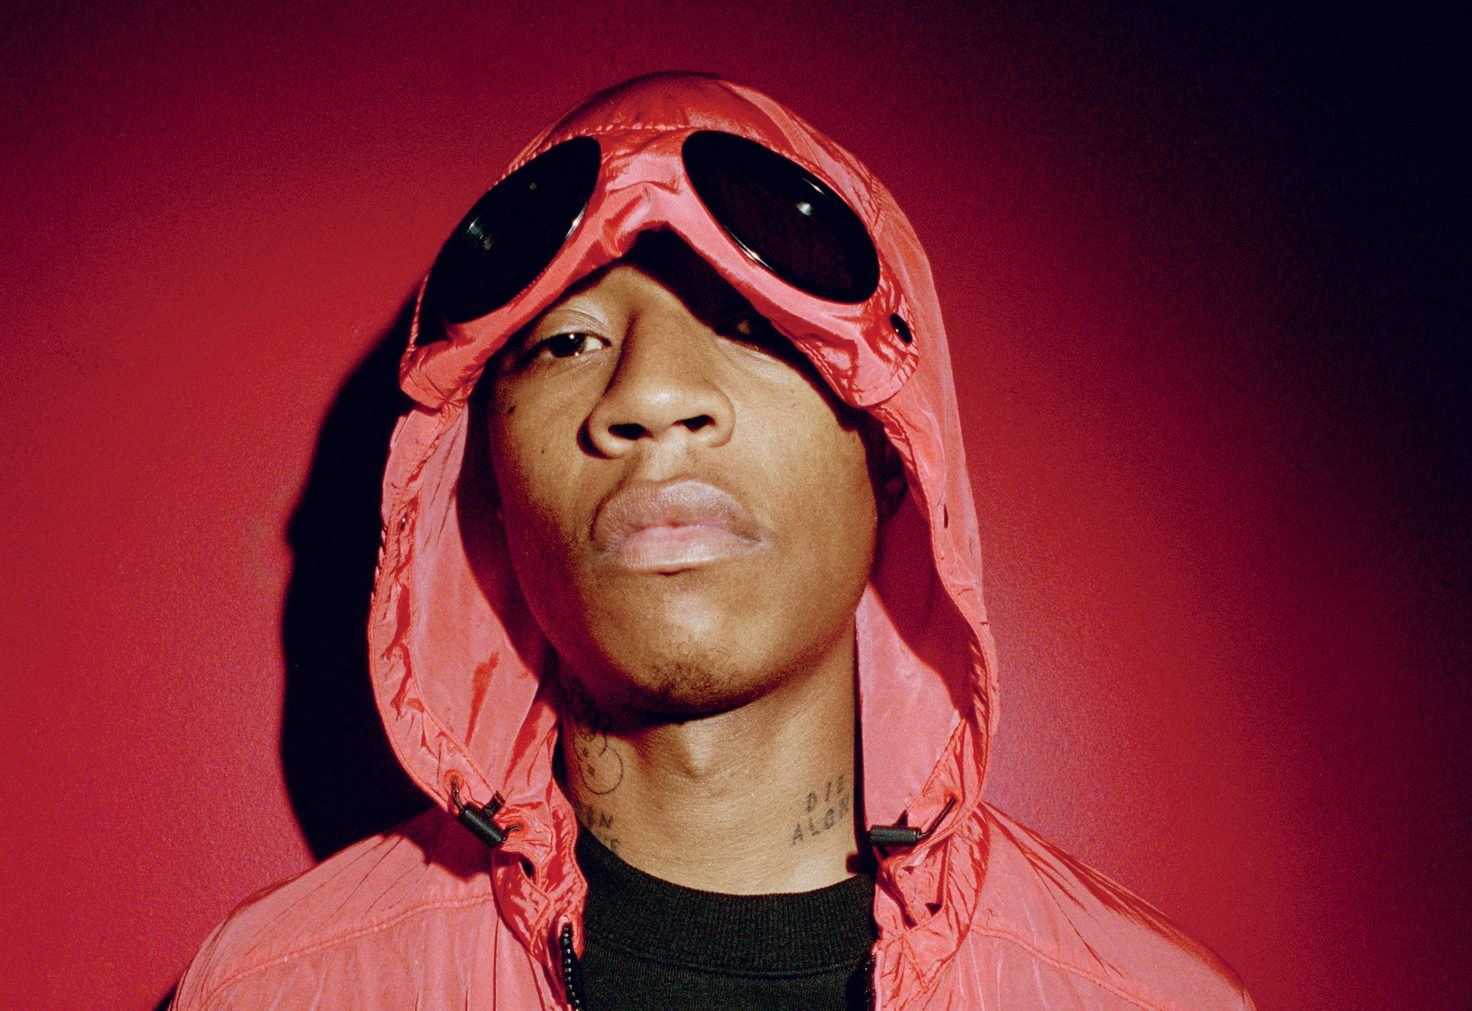 C.P. Company Eyes On The City, chapter 8 by Rejjie Snow